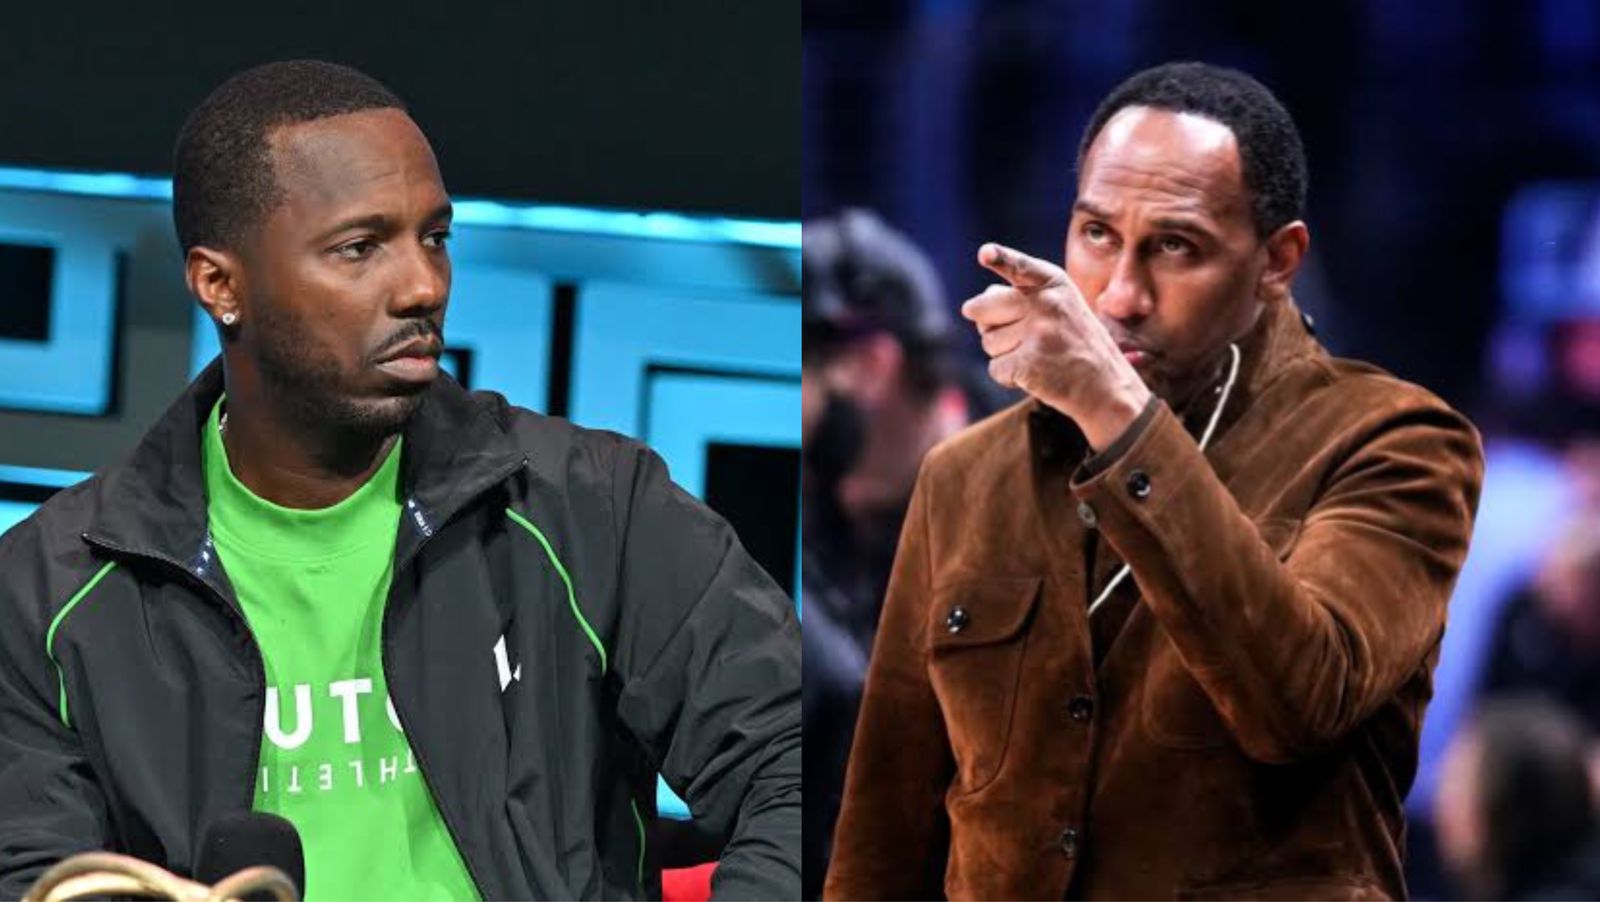 Watch Stephen A. Smith React To Rich Paul’s Debate About LeBron James Vs Michael Jordan Being The GOAT